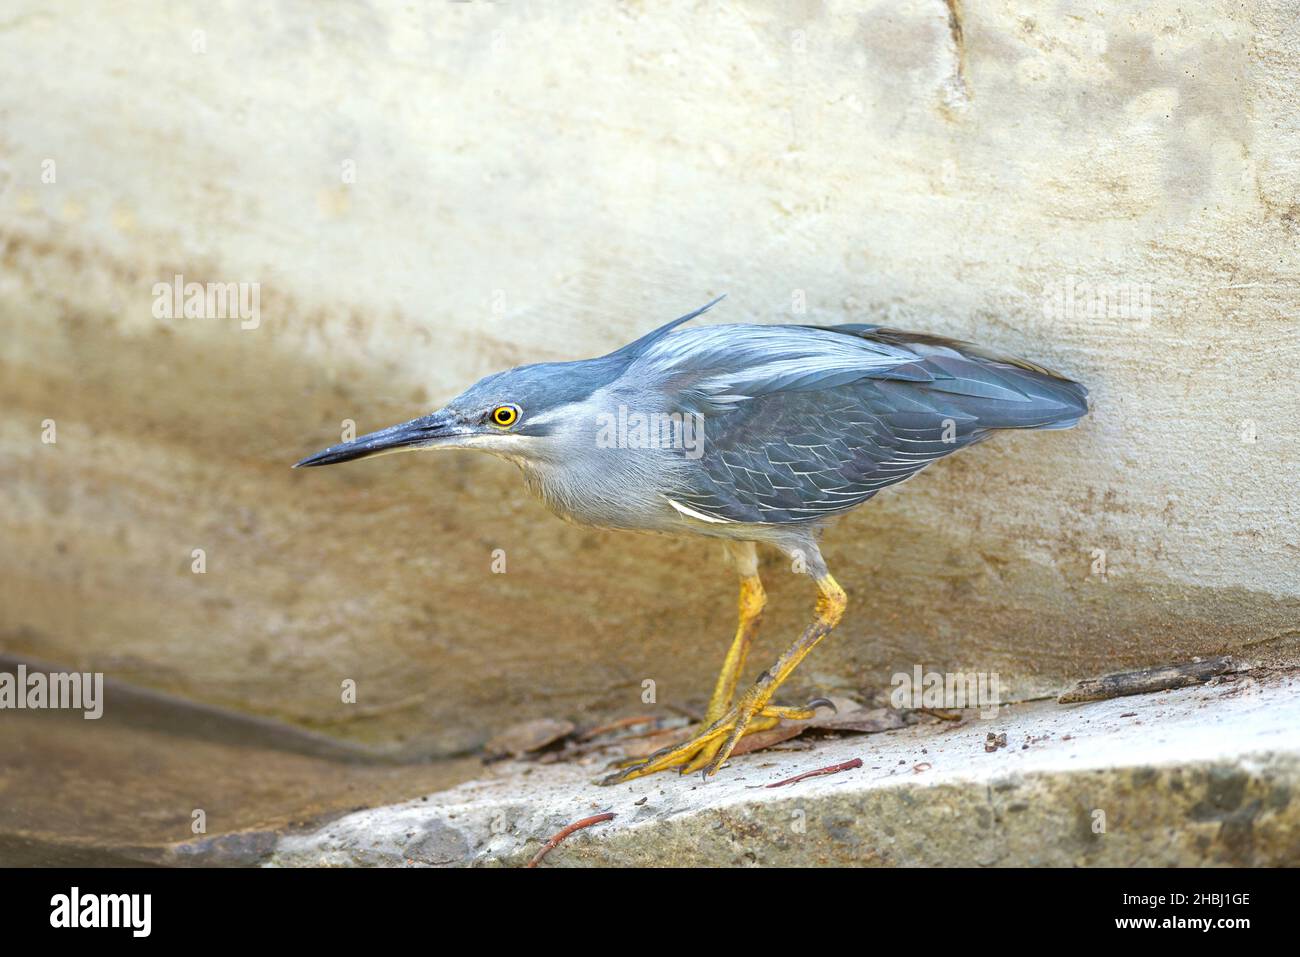 Little Heron also known as a Striated Heron or Mangrove Heron. Stock Photo